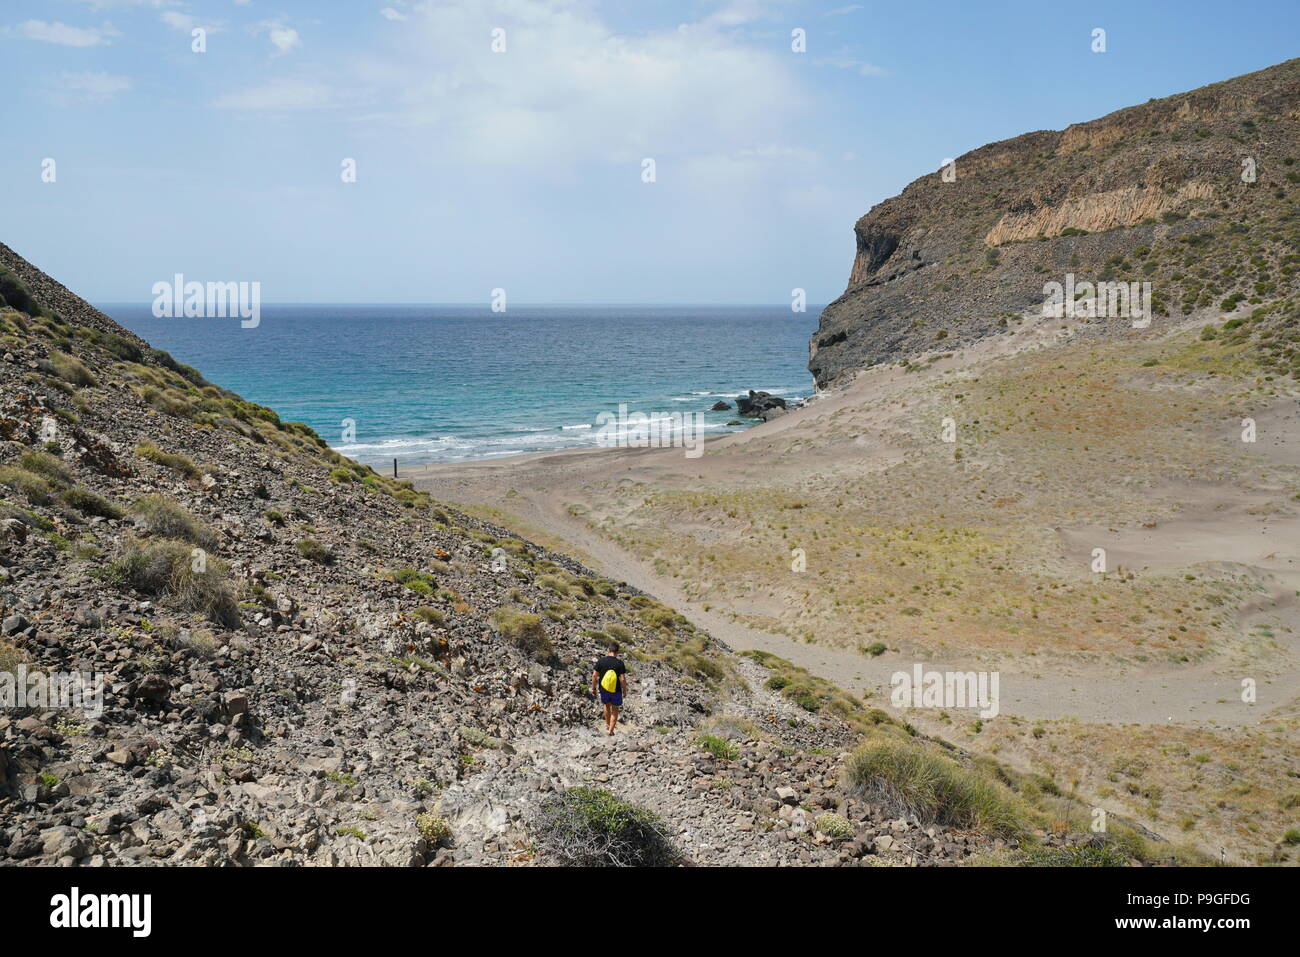 Footpath leading to a secluded sandy beach, Cala Chica in the Cabo de Gata-Níjar natural park, Mediterranean sea, Almeria, Andalusia, Spain Stock Photo